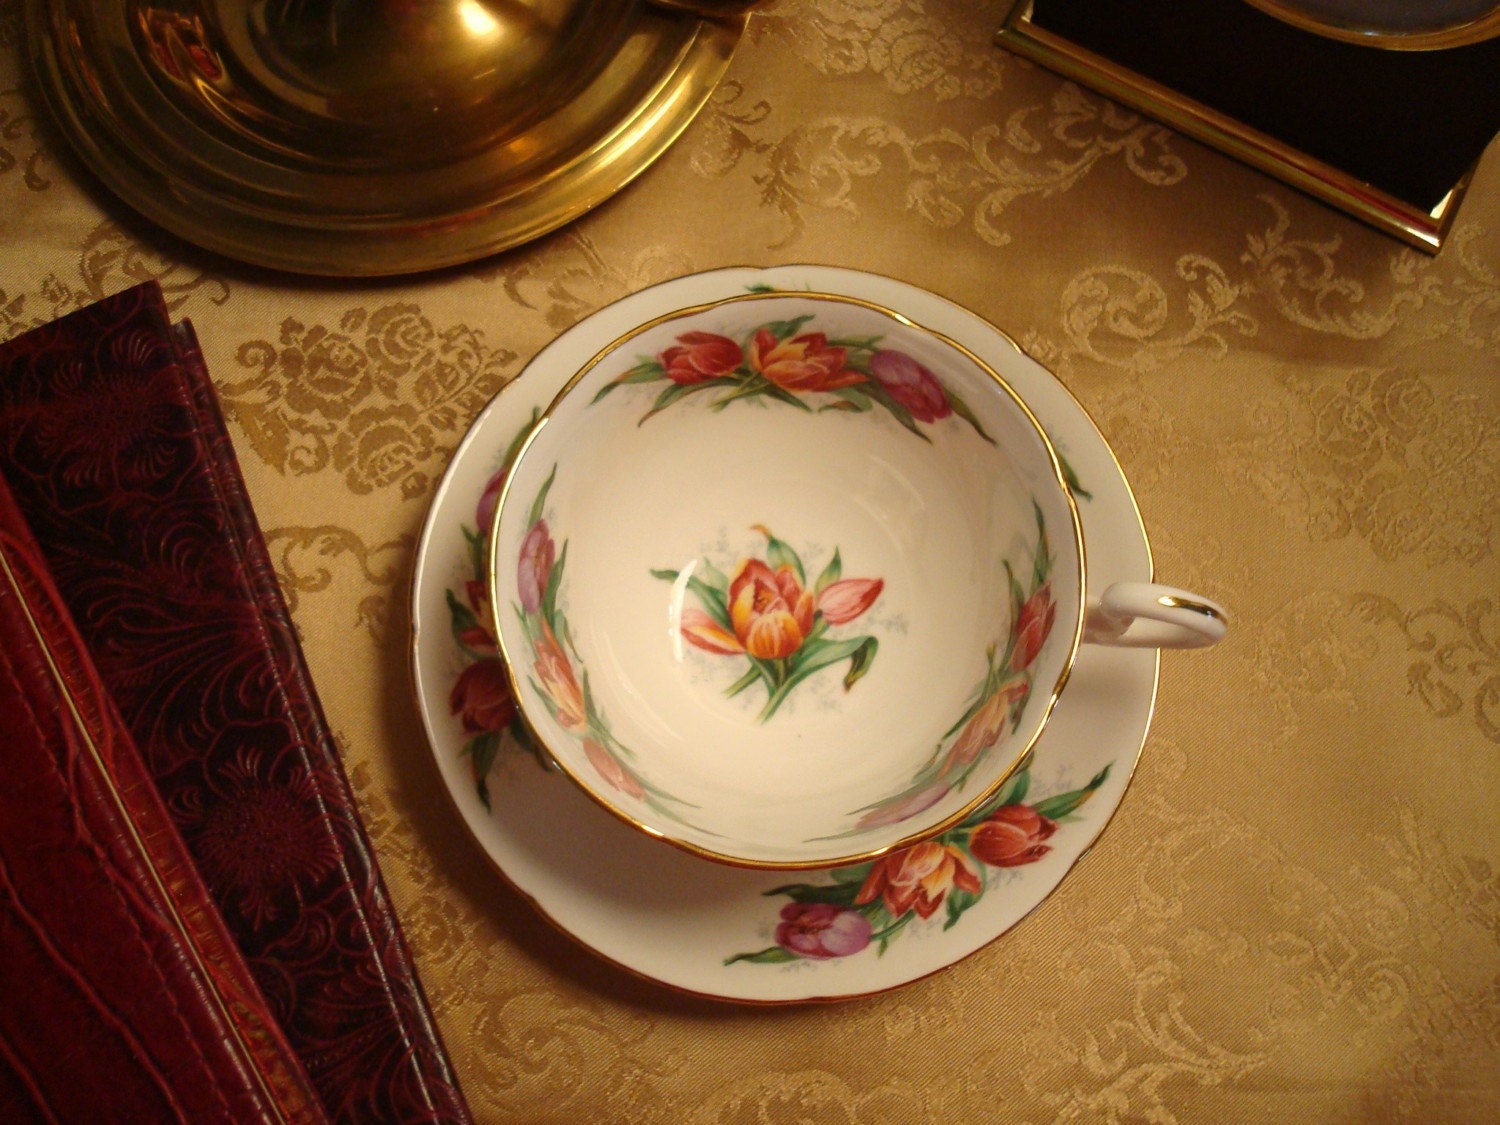 Tea Time Necessity....The Kitty Bennet Teacup and Saucer...Beautiful Vintage Royal Grafton Bone China